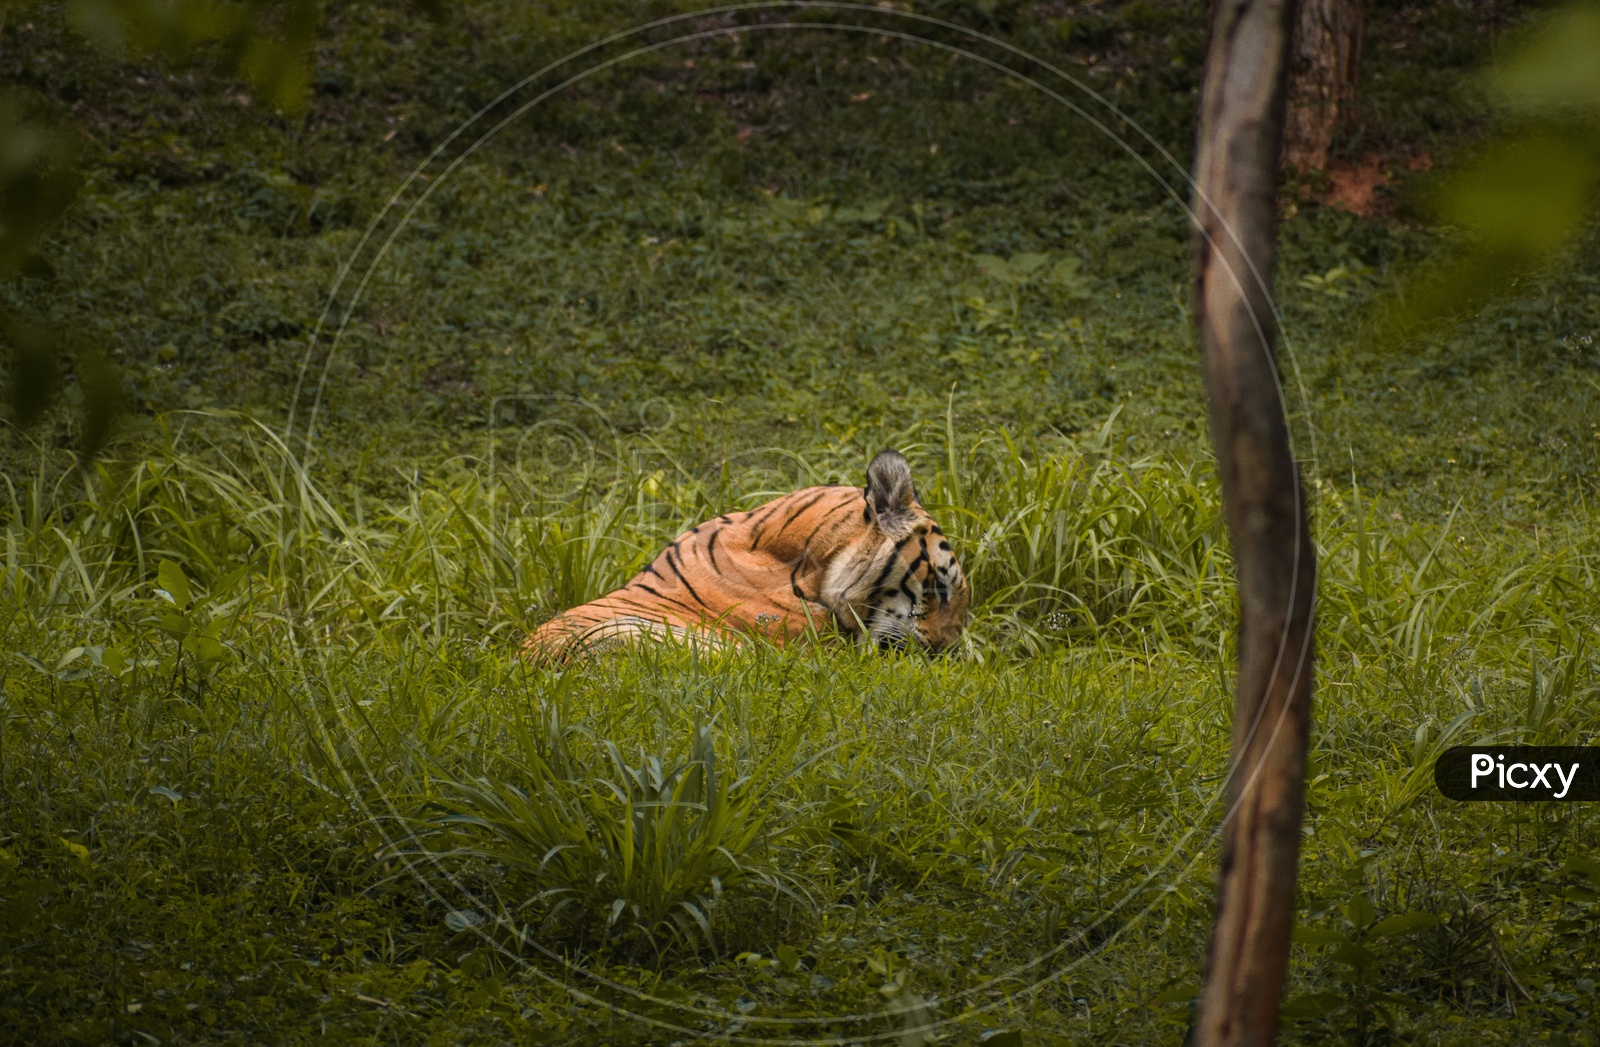 The Tiger Sleeping in the grass